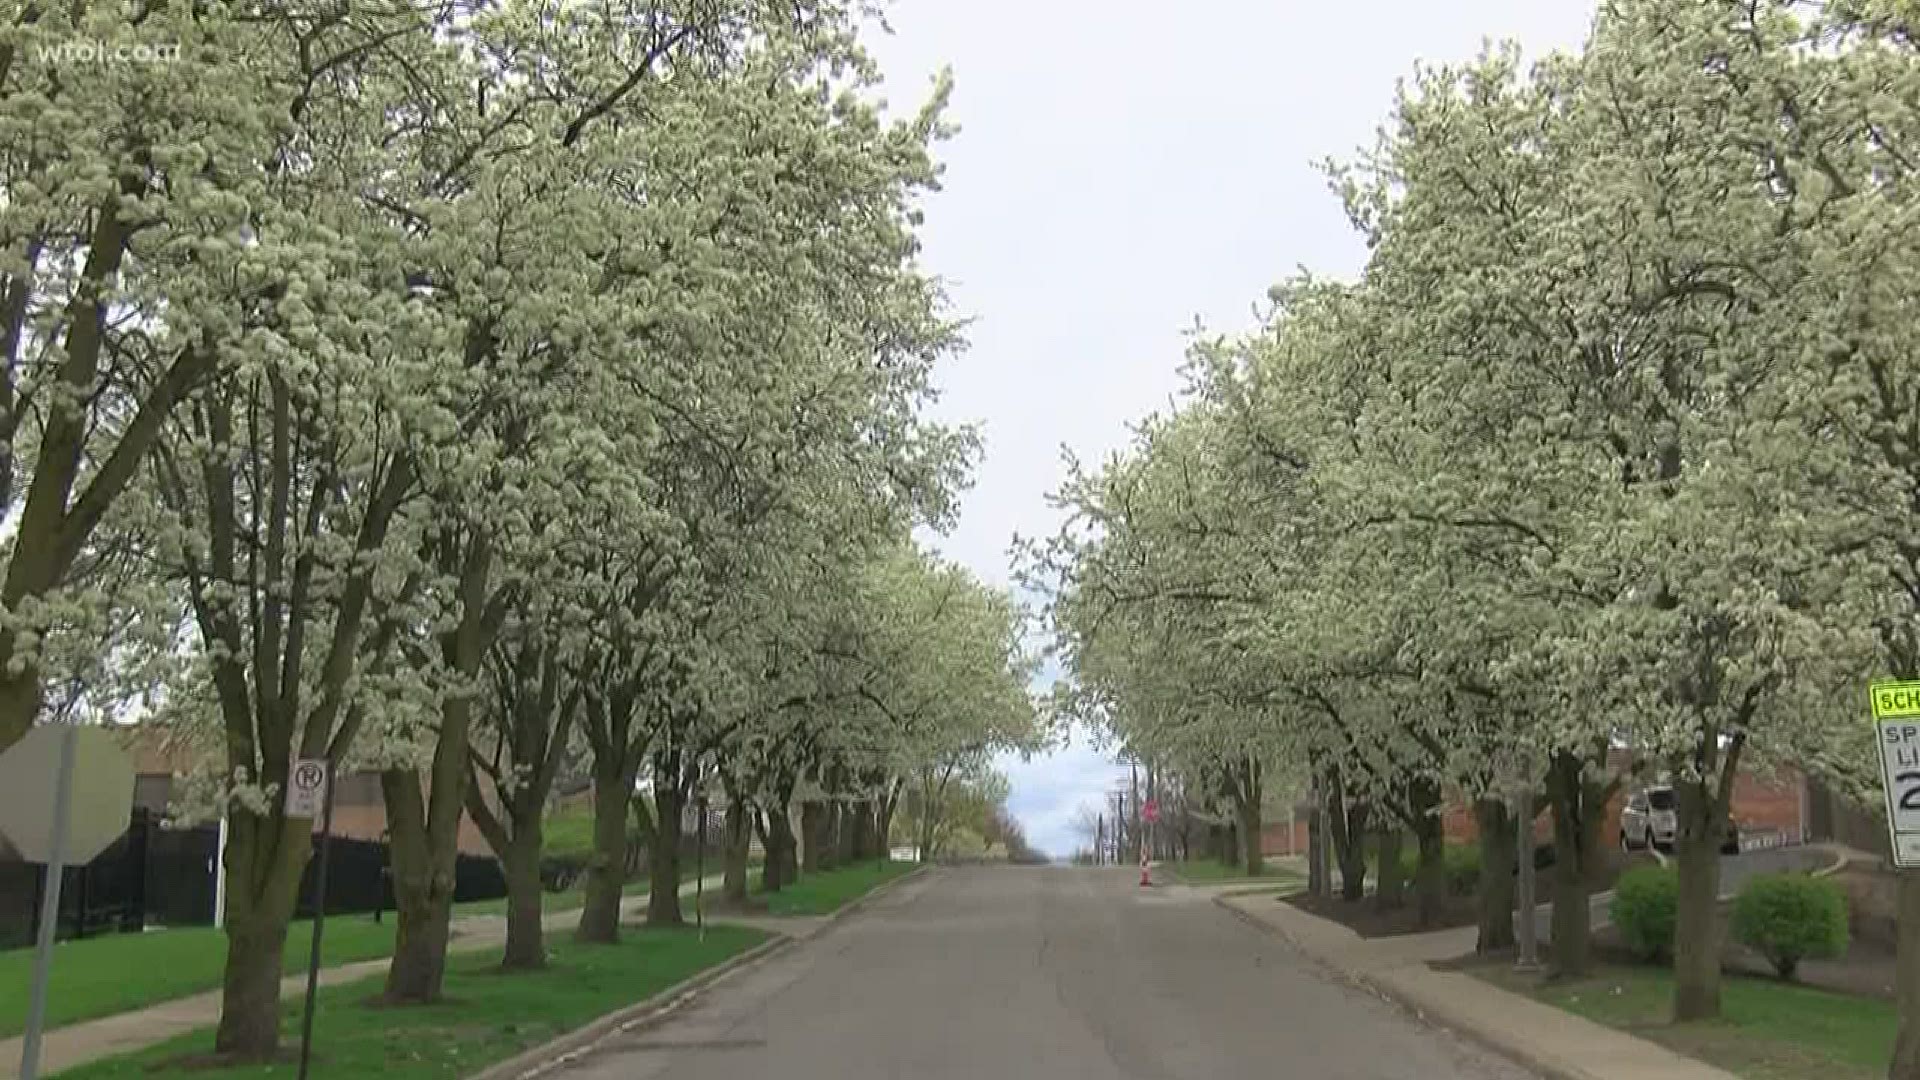 Because right now, we need it: The sights and sounds of nature around pear trees, captured by WTOL 11 photojournalist John Juby.